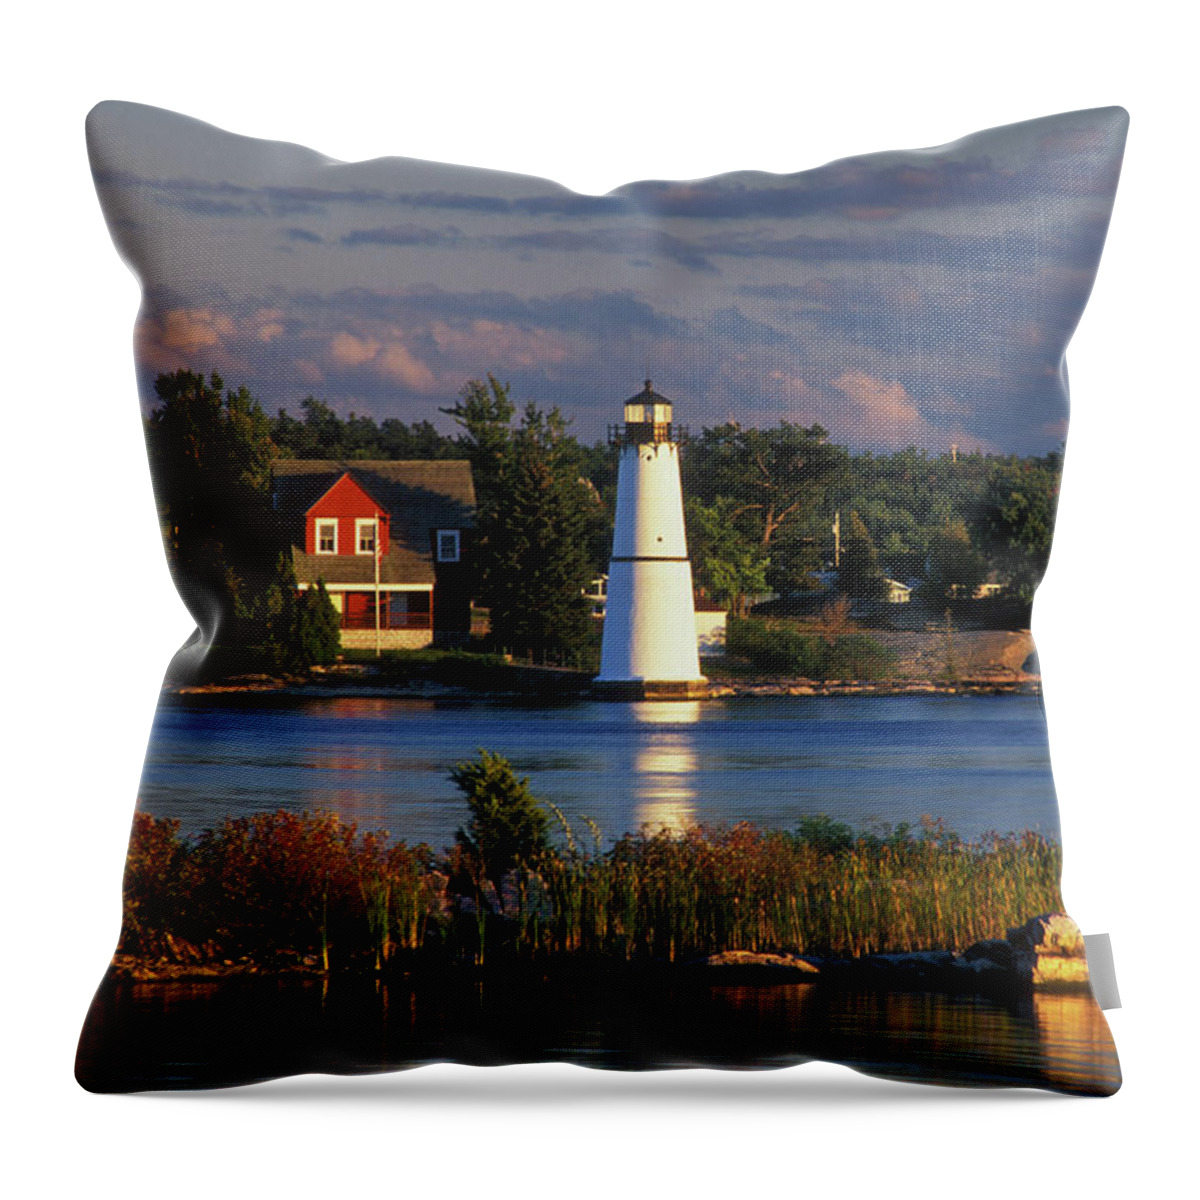 Rock Throw Pillow featuring the photograph Fs000128 by Daniel Dempster